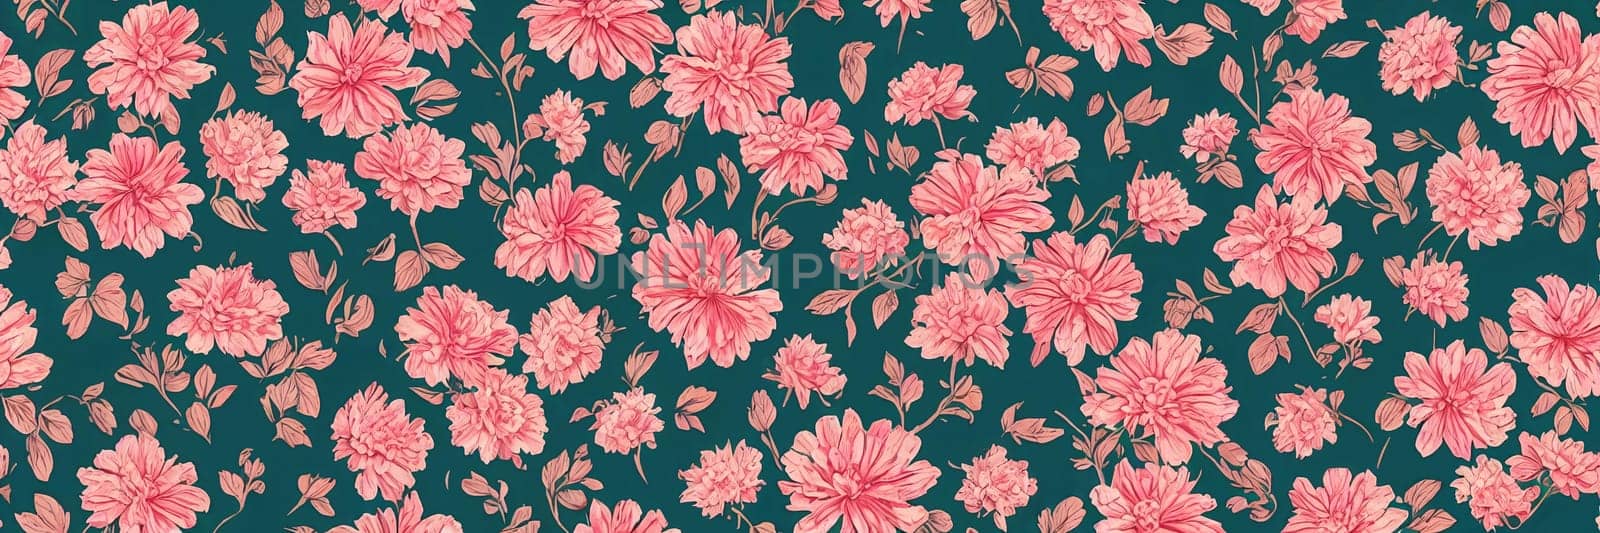 An intricate vintage floral background filled with delicate blooms and foliage. by GoodOlga